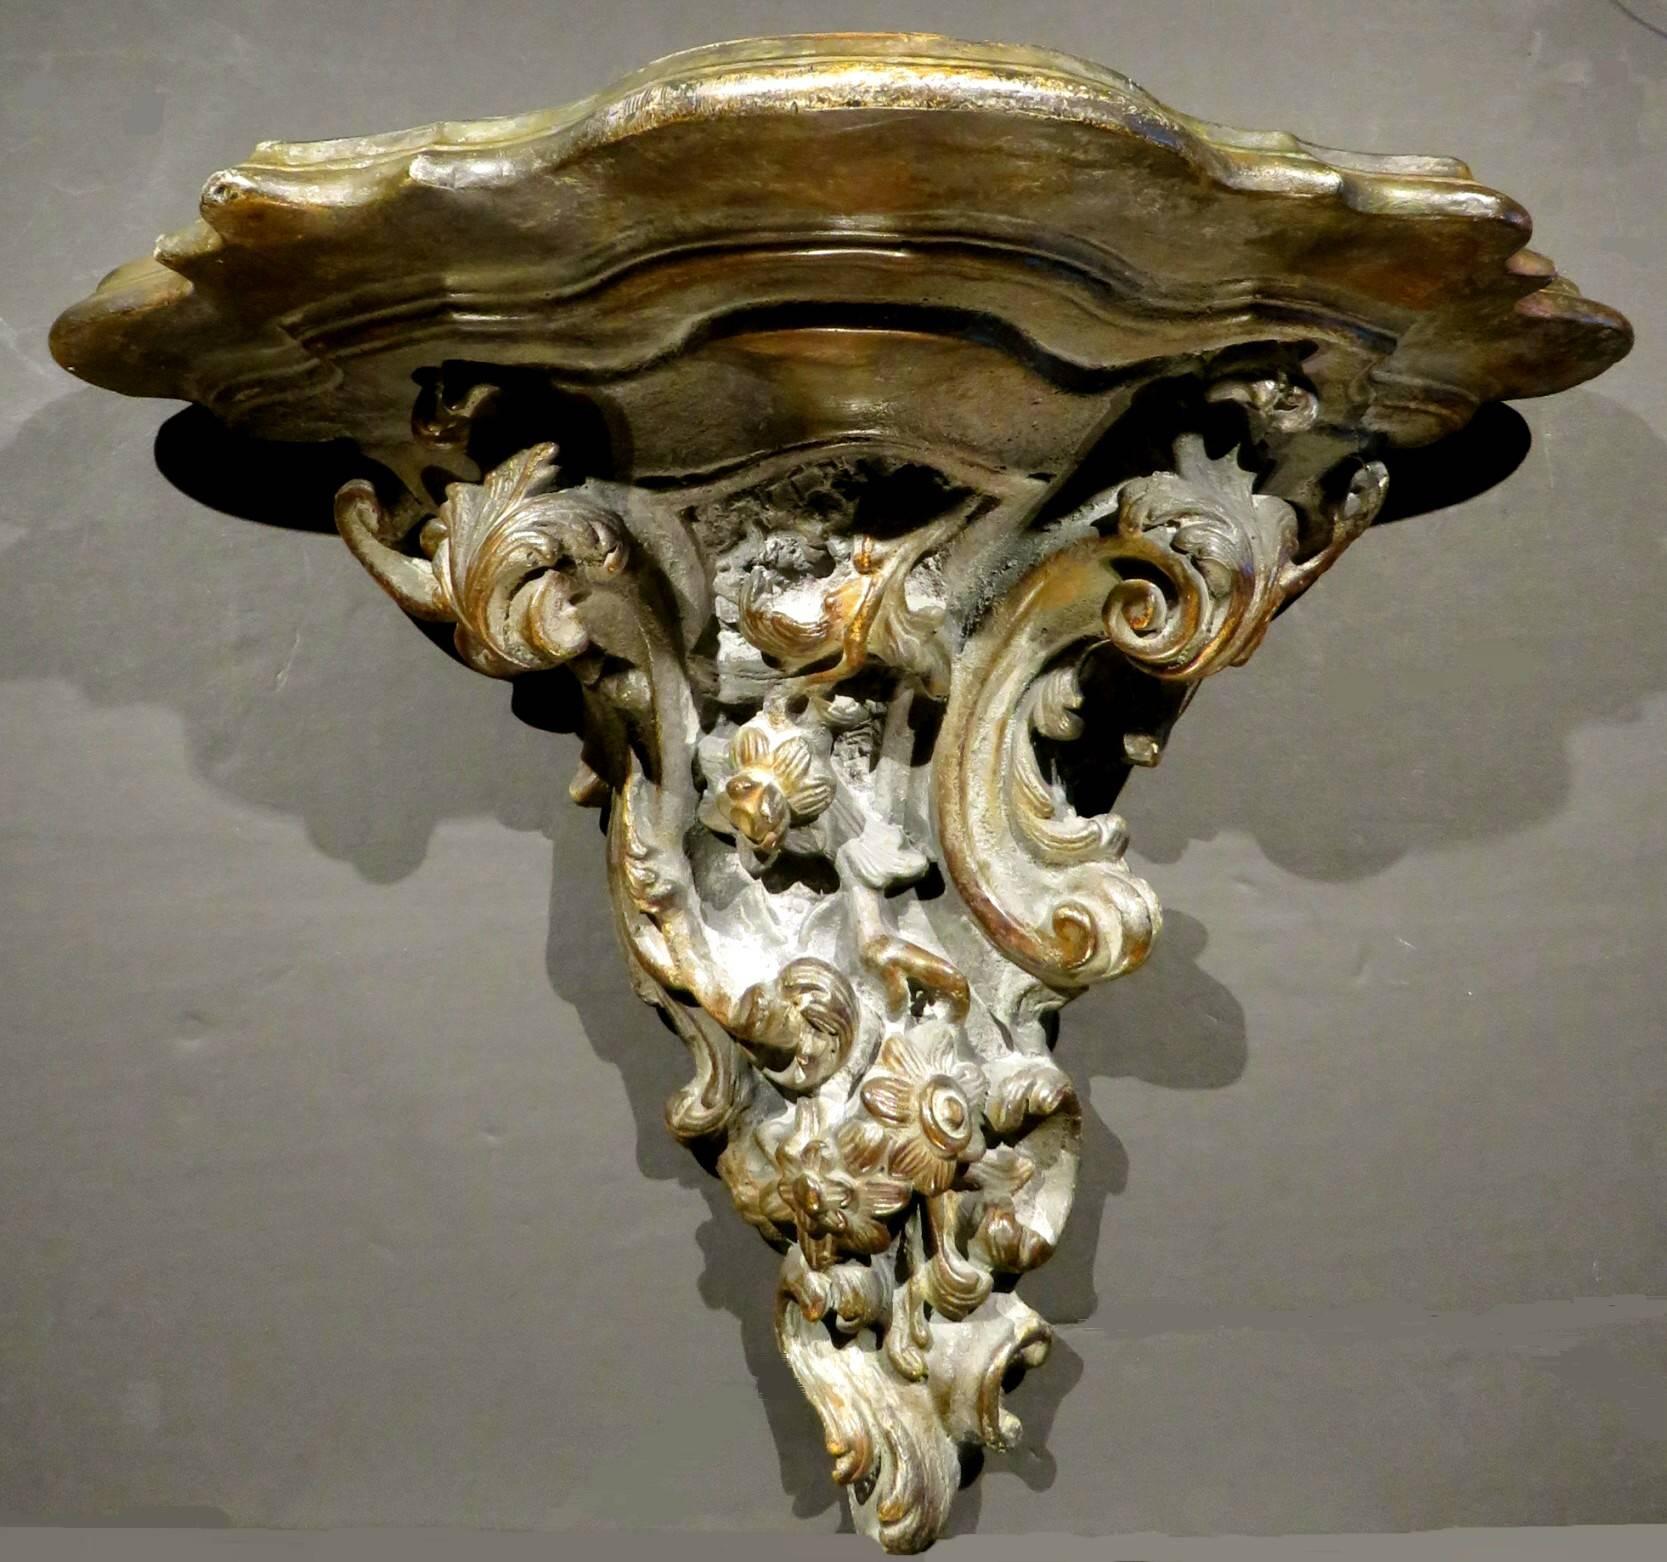 A very substantial and fine 18th century Rococo period wall bracket, showing a trefoil shaped plateau above a robust grouping of organic elements composed of leafy vines, flower-heads and 'C' scrolls in high relief, the surface exhibiting an